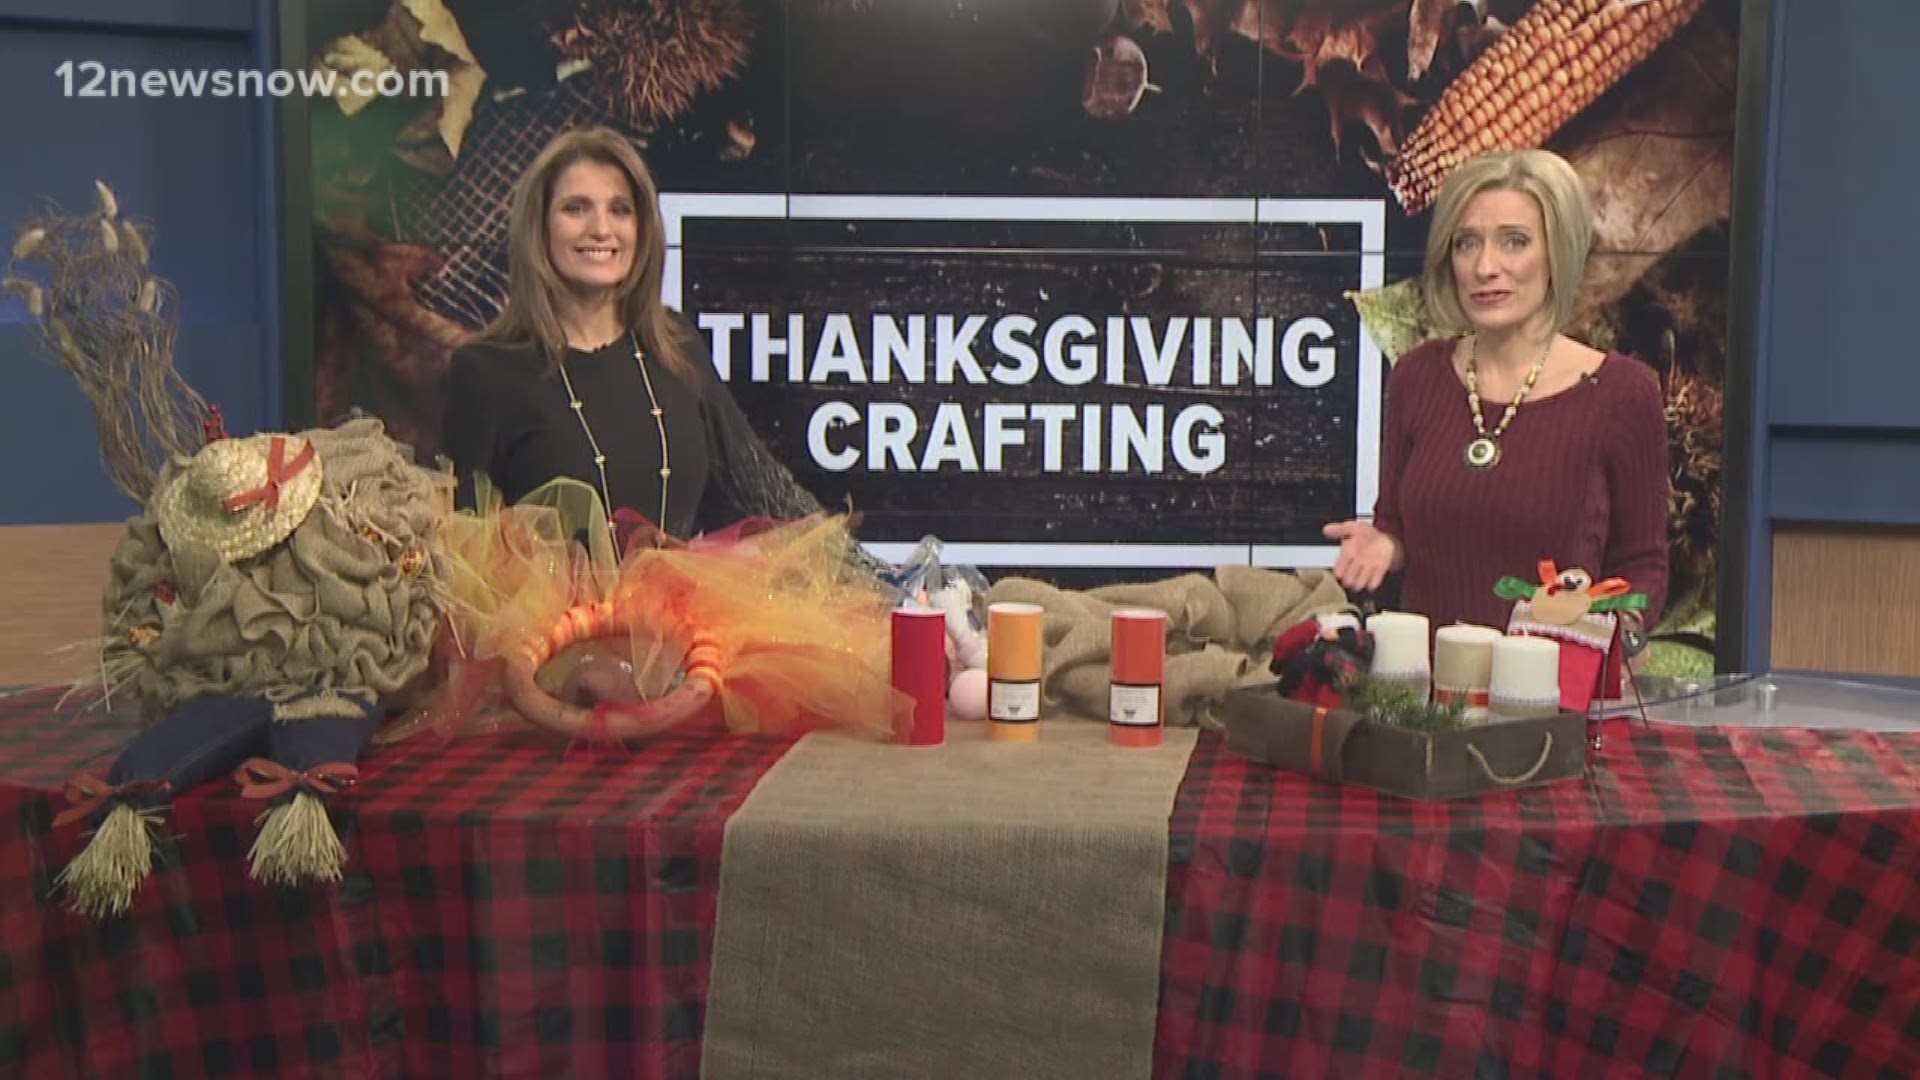 12 News Daybreak crew finishes their week of crafting with homemade wreaths